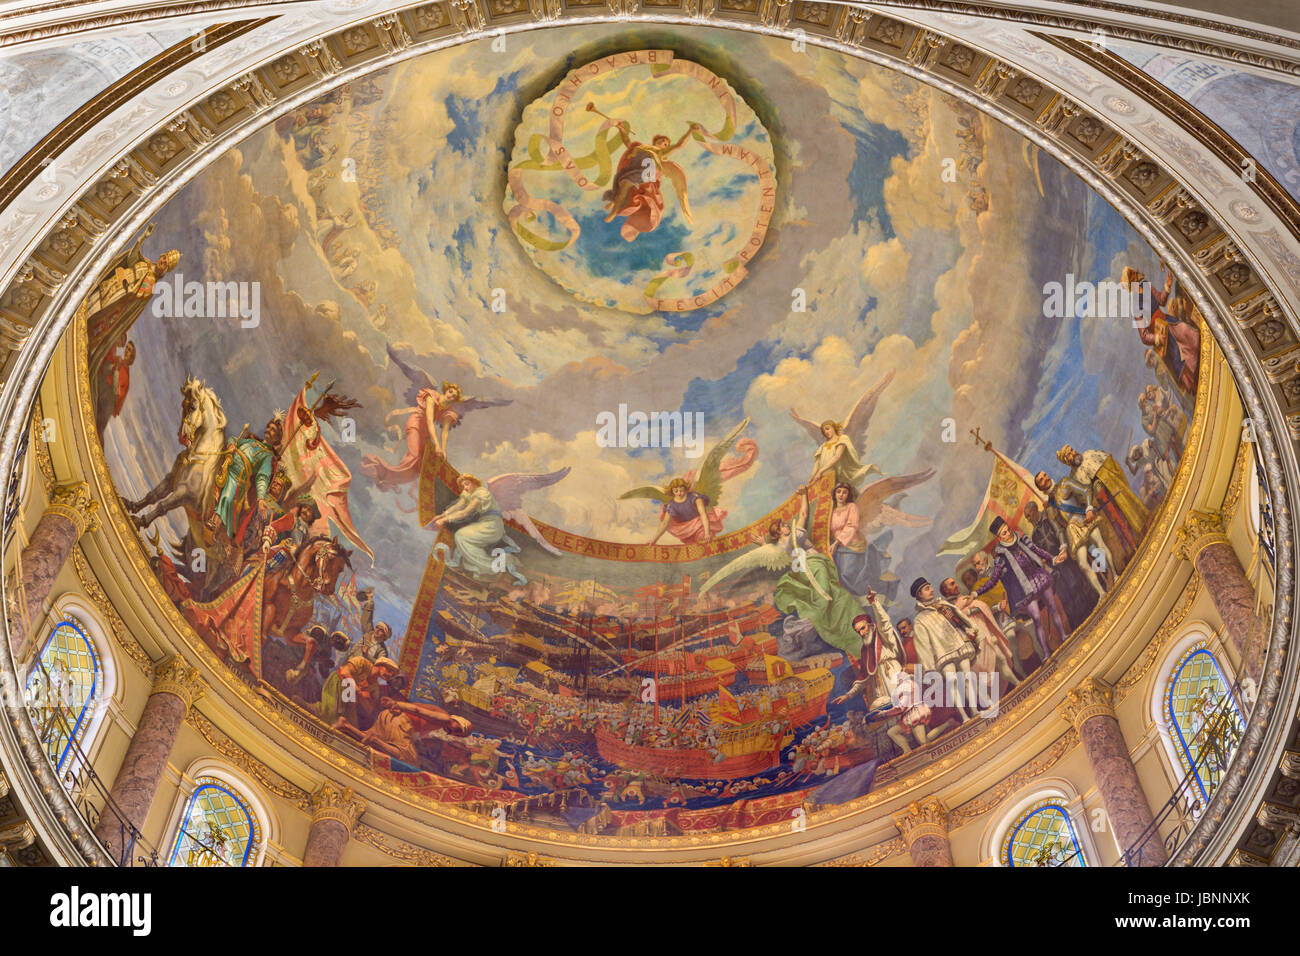 TURIN, ITALY - MARCH 15, 2017: The cupola with the fresco of Battle of Lepanto in 1571 in and Mary Help of Christians - Basilica Ausilatrice Stock Photo